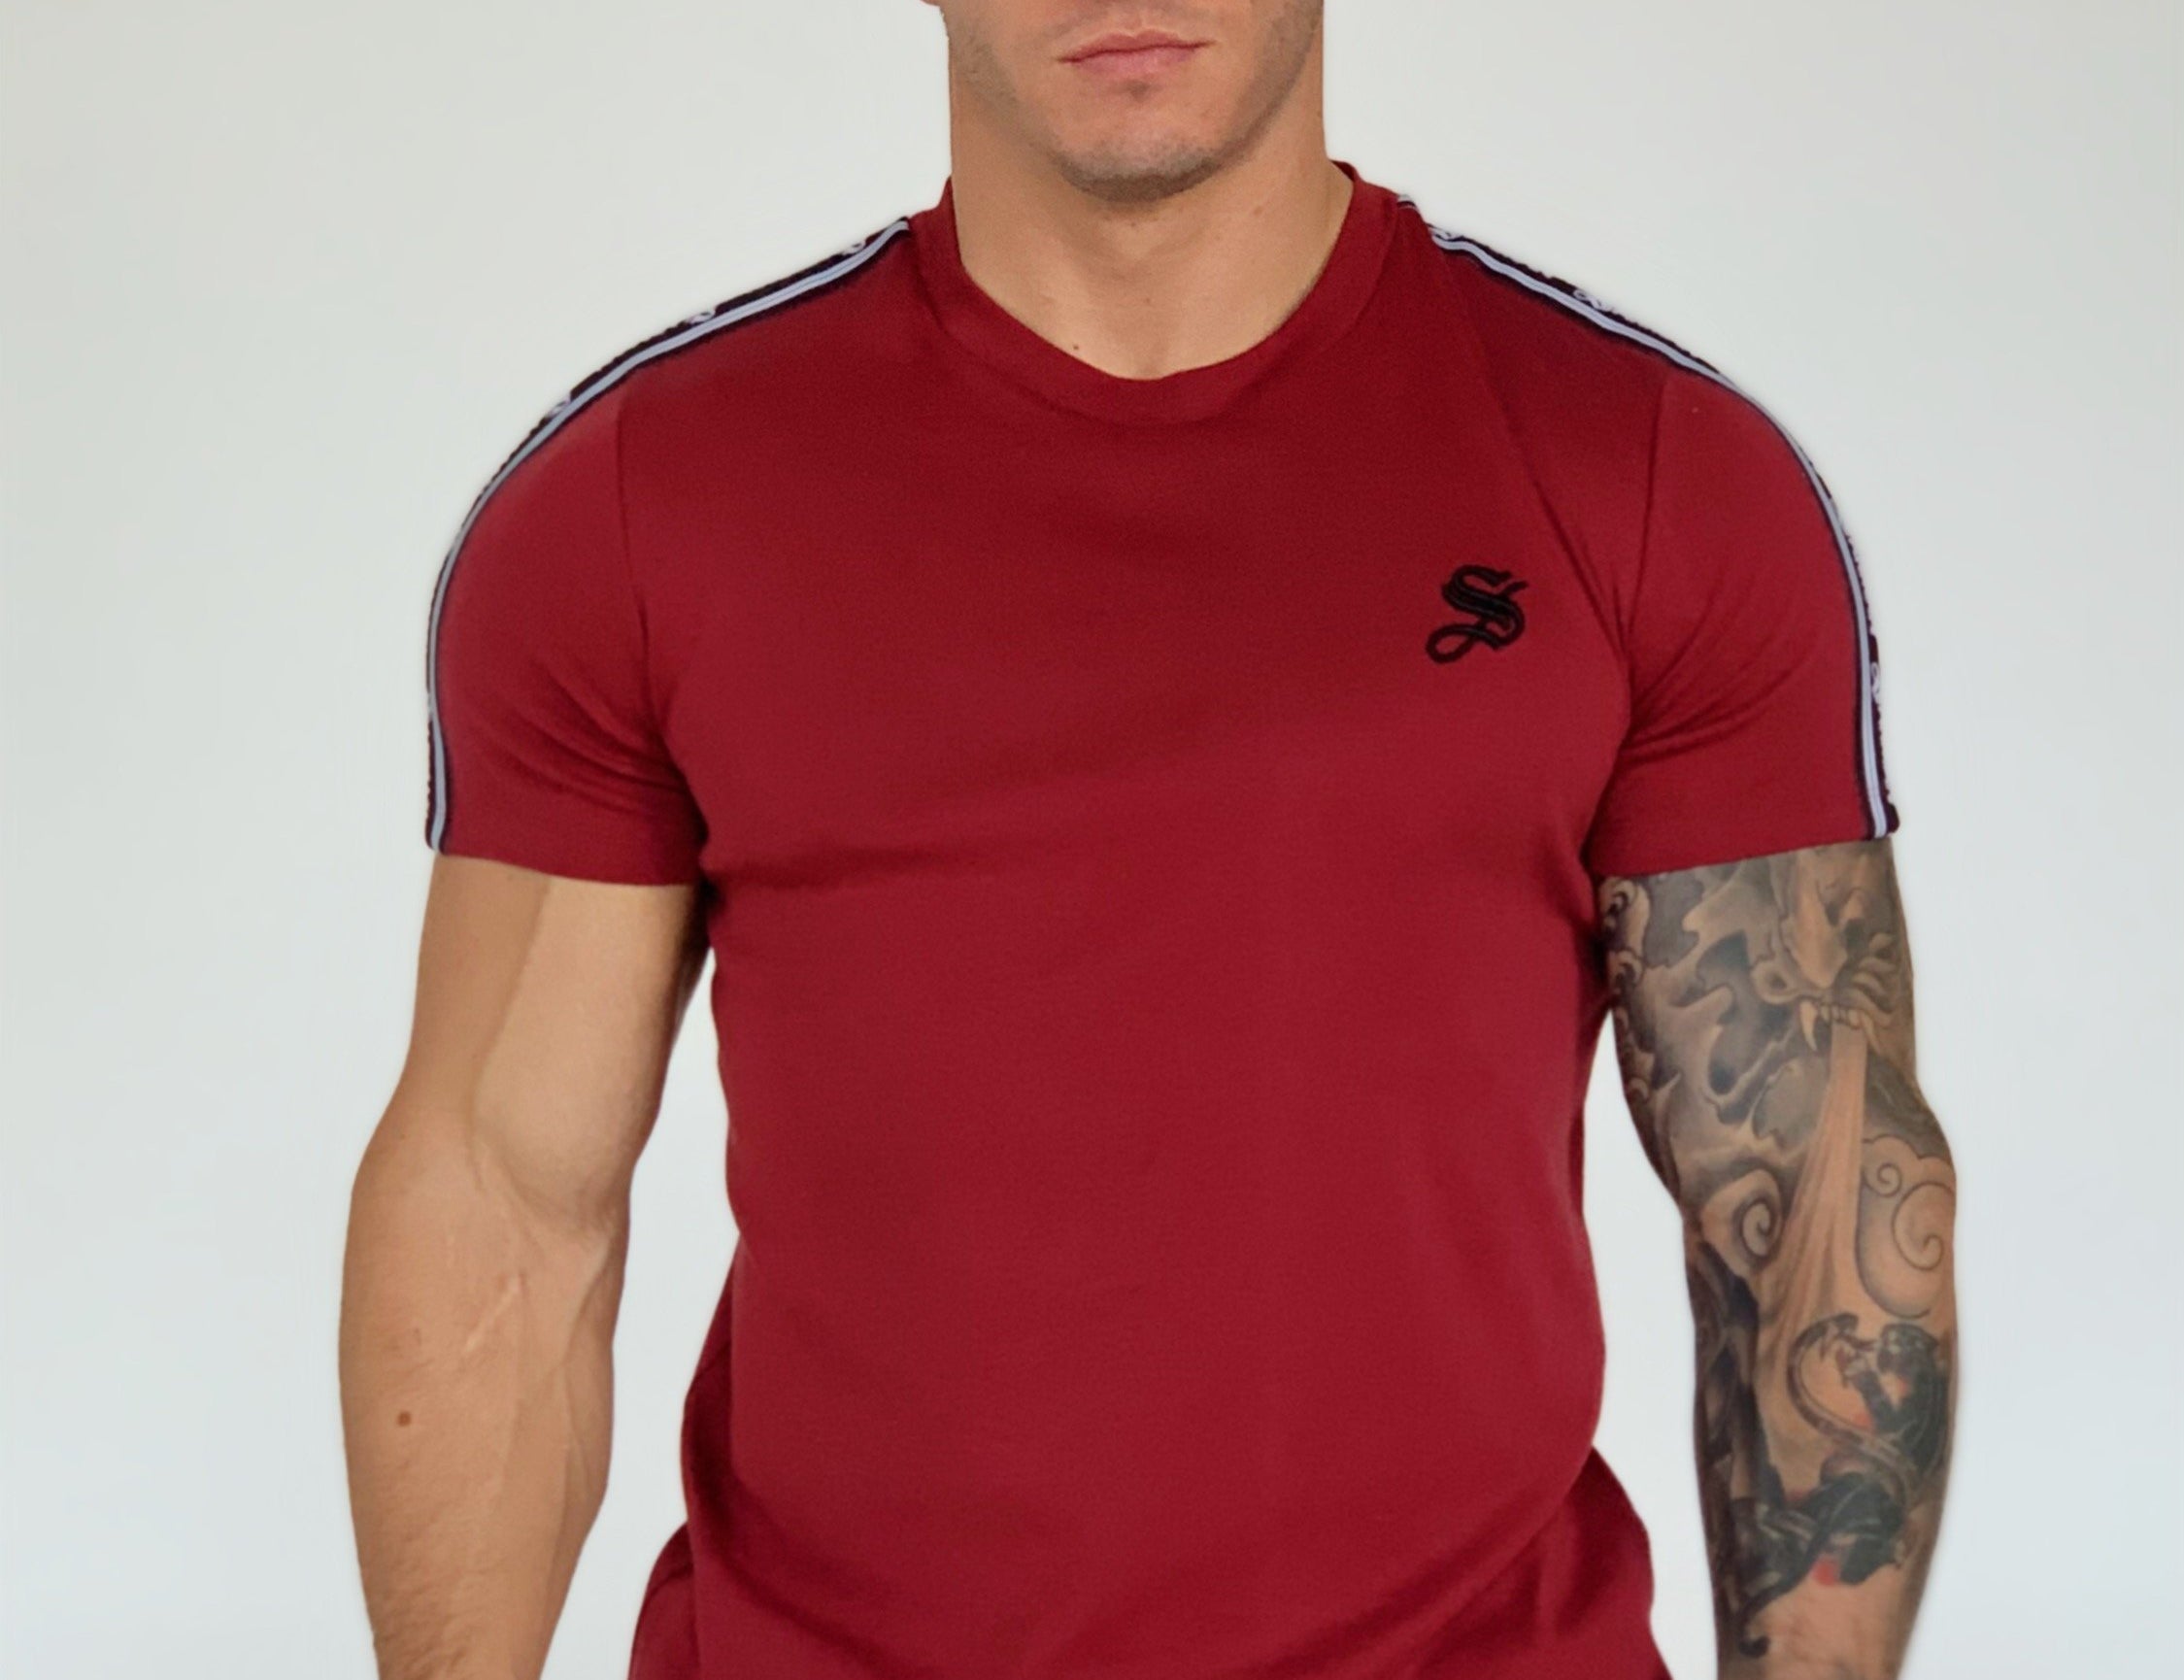 Filly - Burgundy T-shirt for Men (PRE-ORDER DISPATCH DATE 1 JUIN 2021) - Sarman Fashion - Wholesale Clothing Fashion Brand for Men from Canada